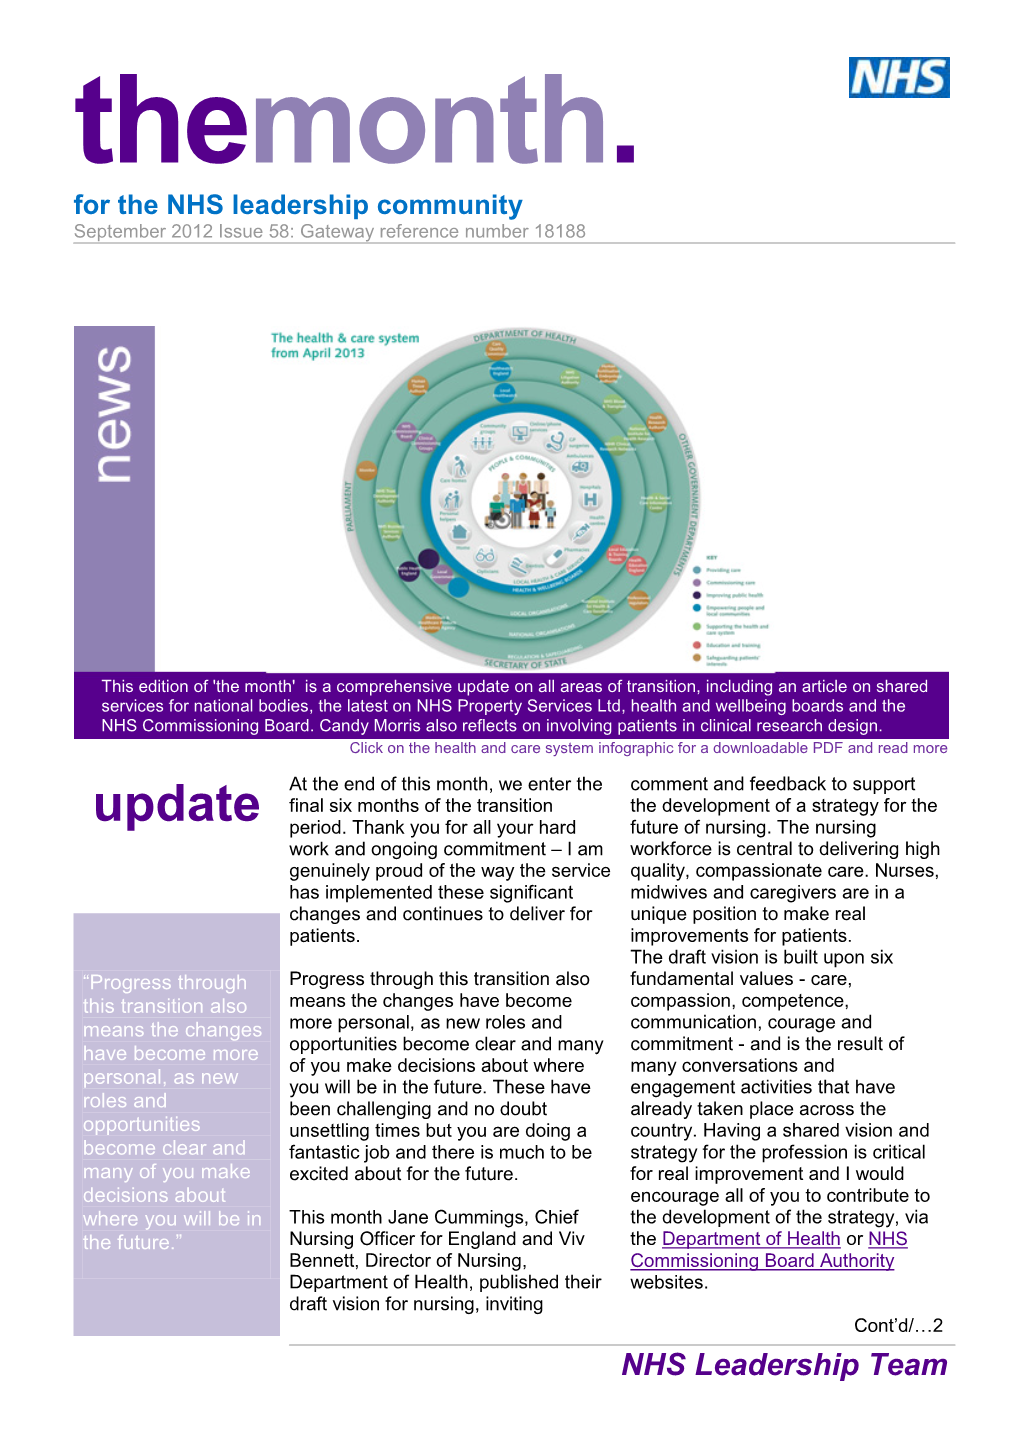 For the NHS Leadership Community September 2012 Issue 58: Gateway Reference Number 18188